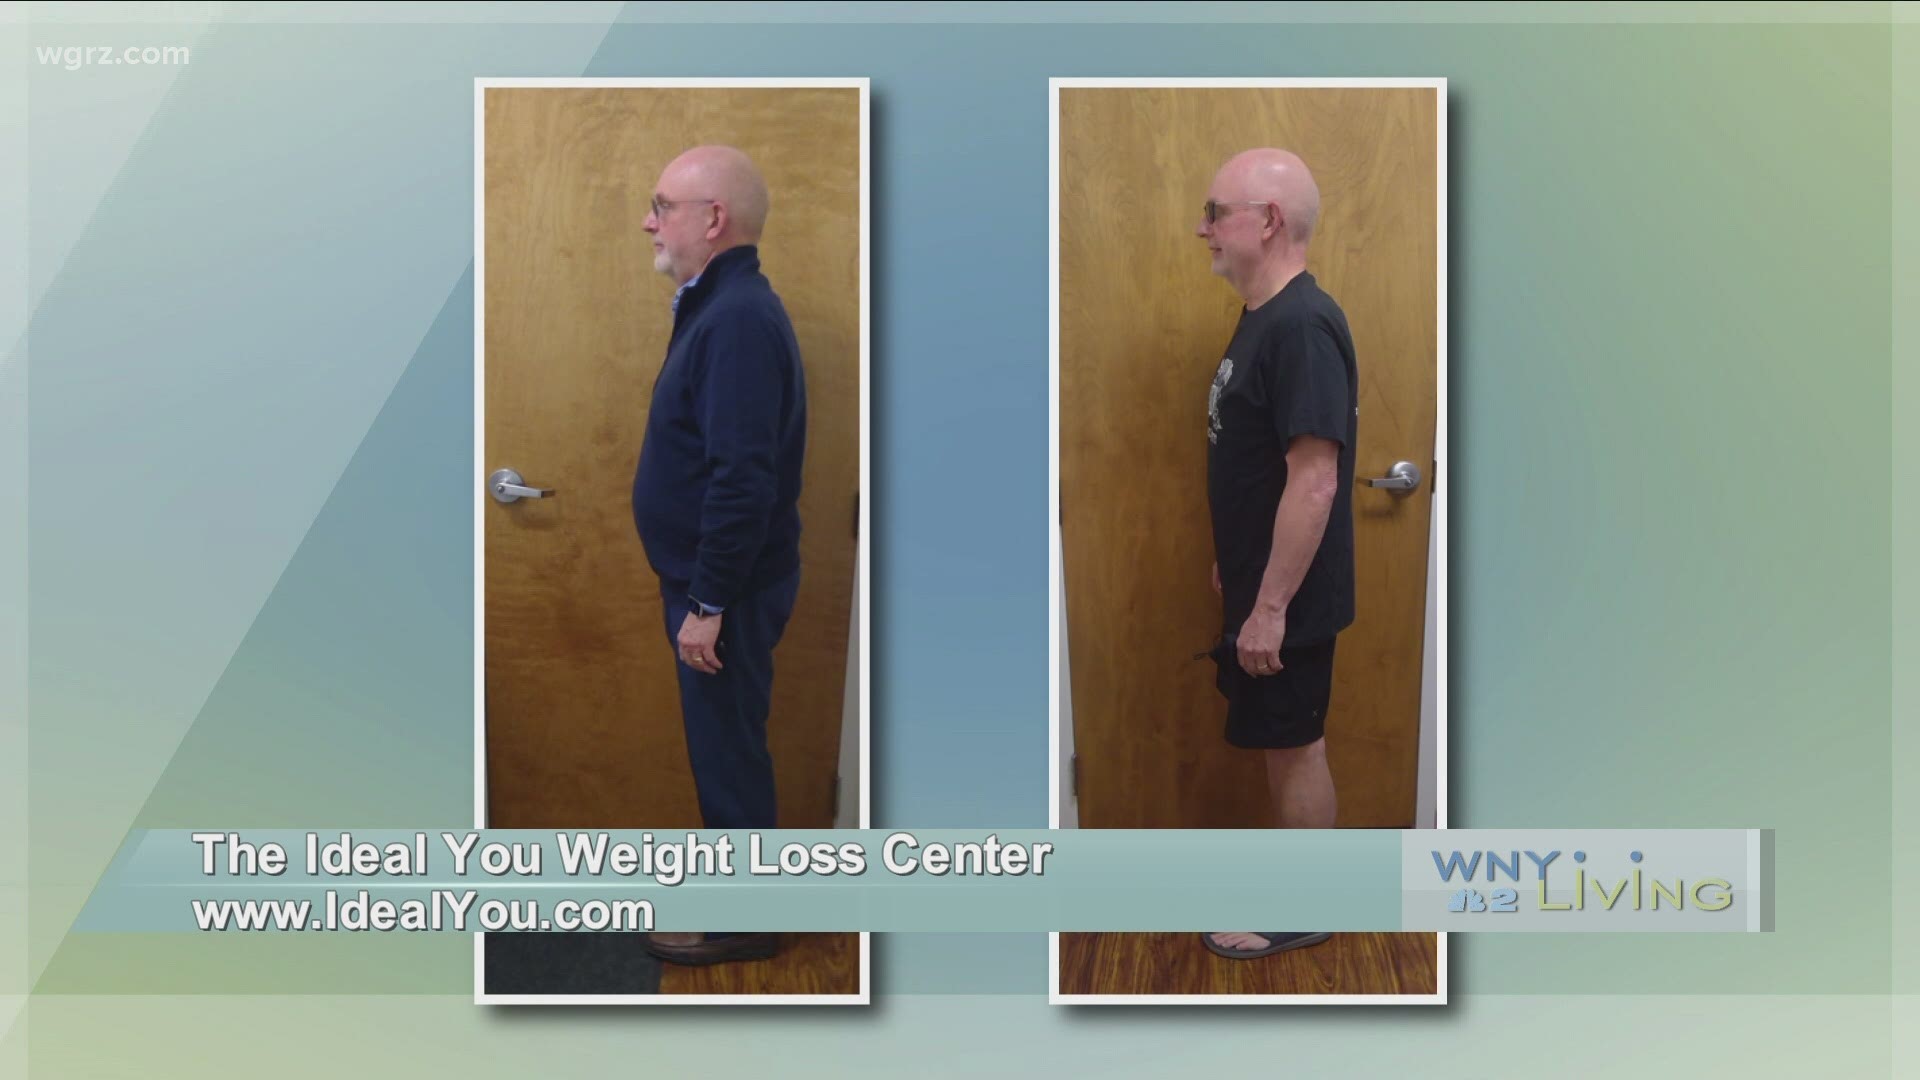 WNY Living - June 19 - The Ideal You Weight Loss Center (THIS VIDEO IS SPONSORED BY THE IDEAL YOU WEIGHT LOSS CENTER)